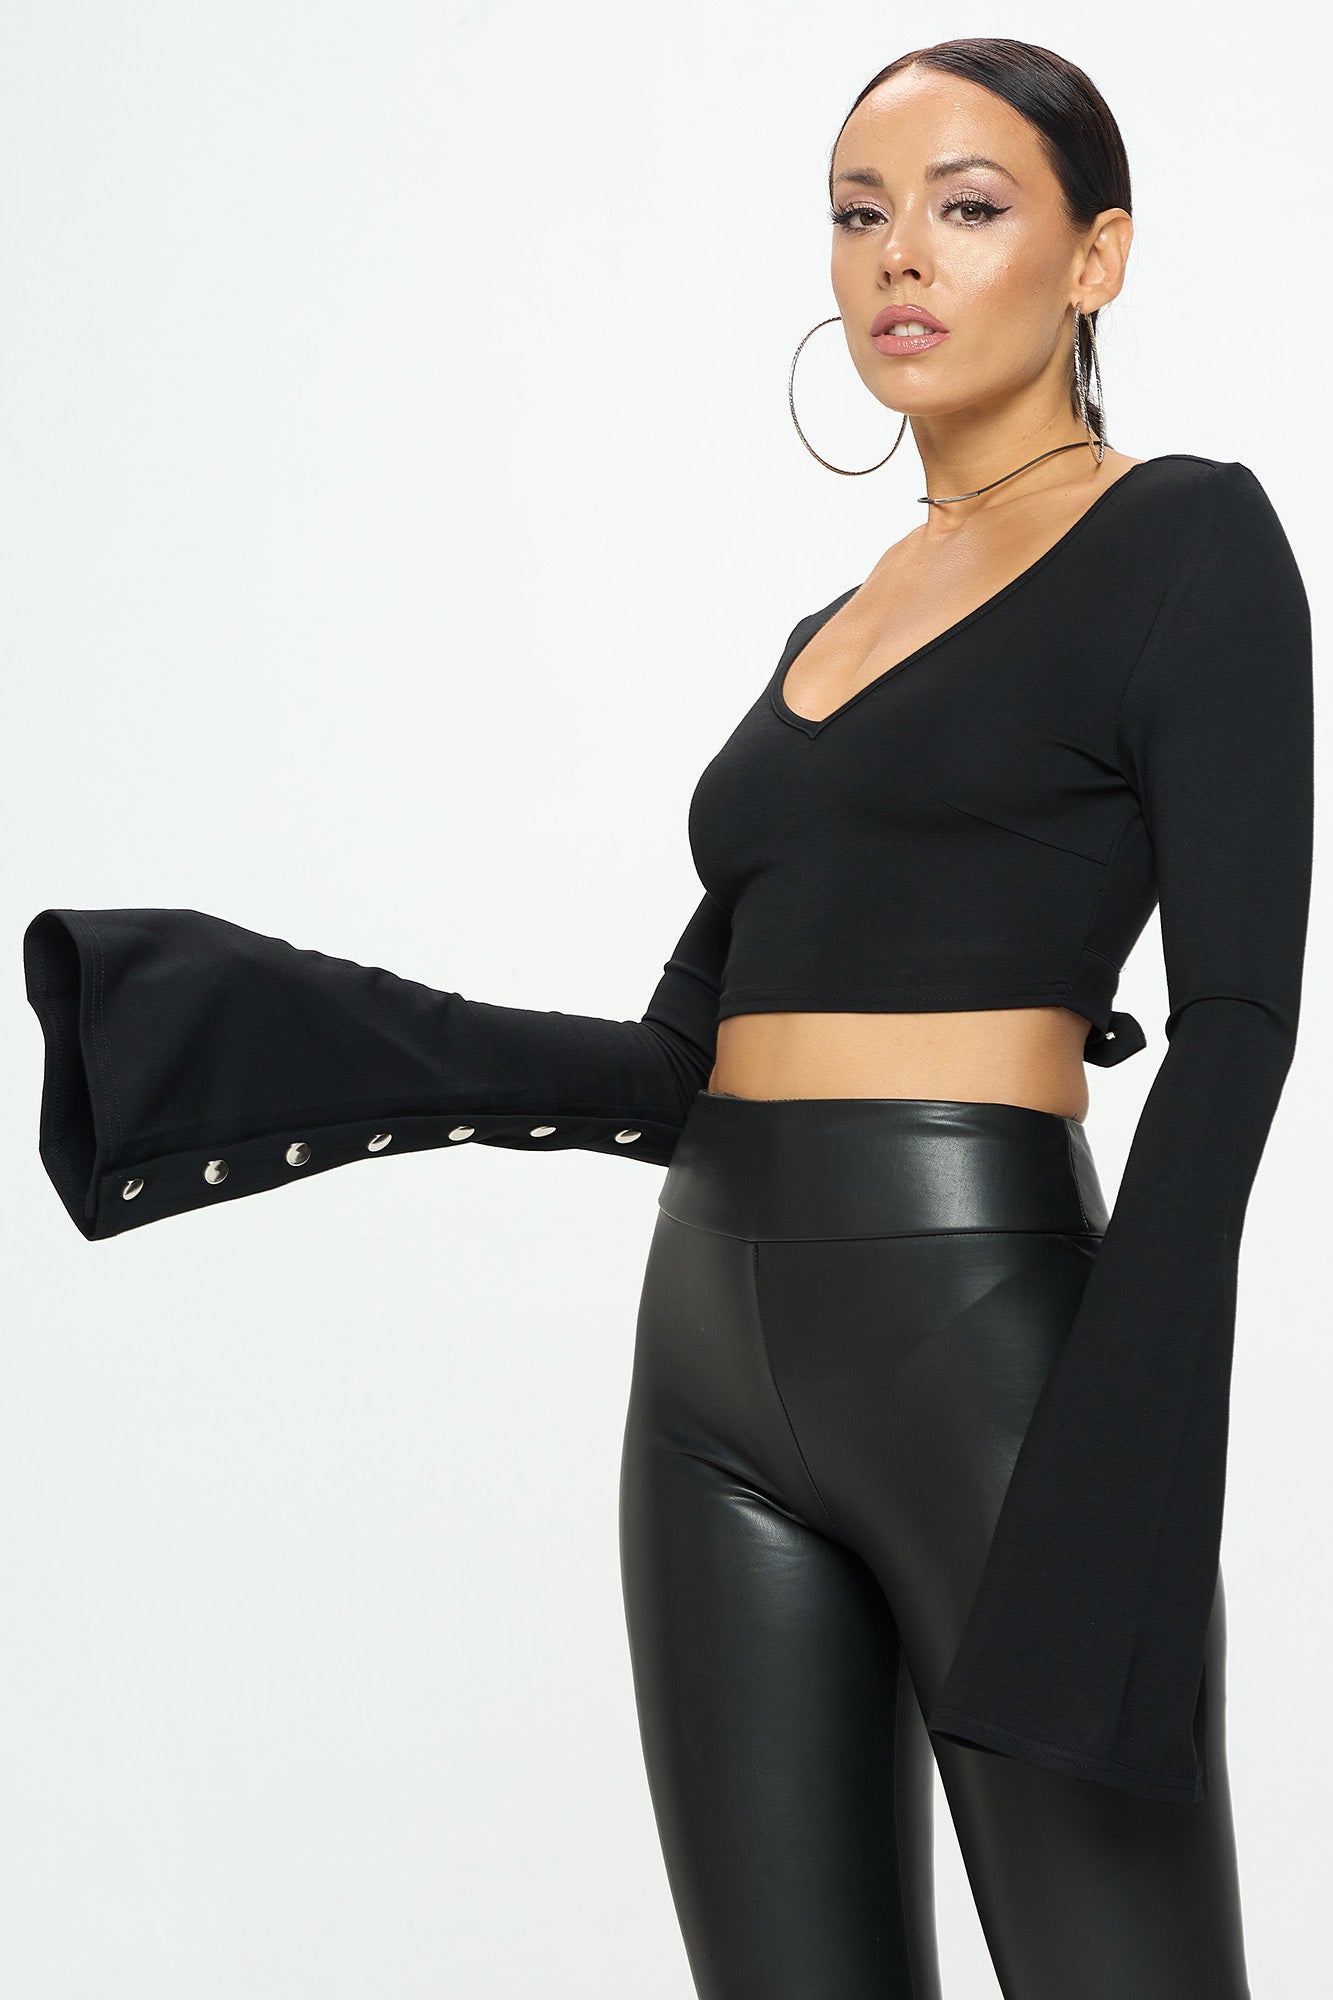 LONG FLARE SLEEVE OPEN BACK BUCKLED CROP TOP